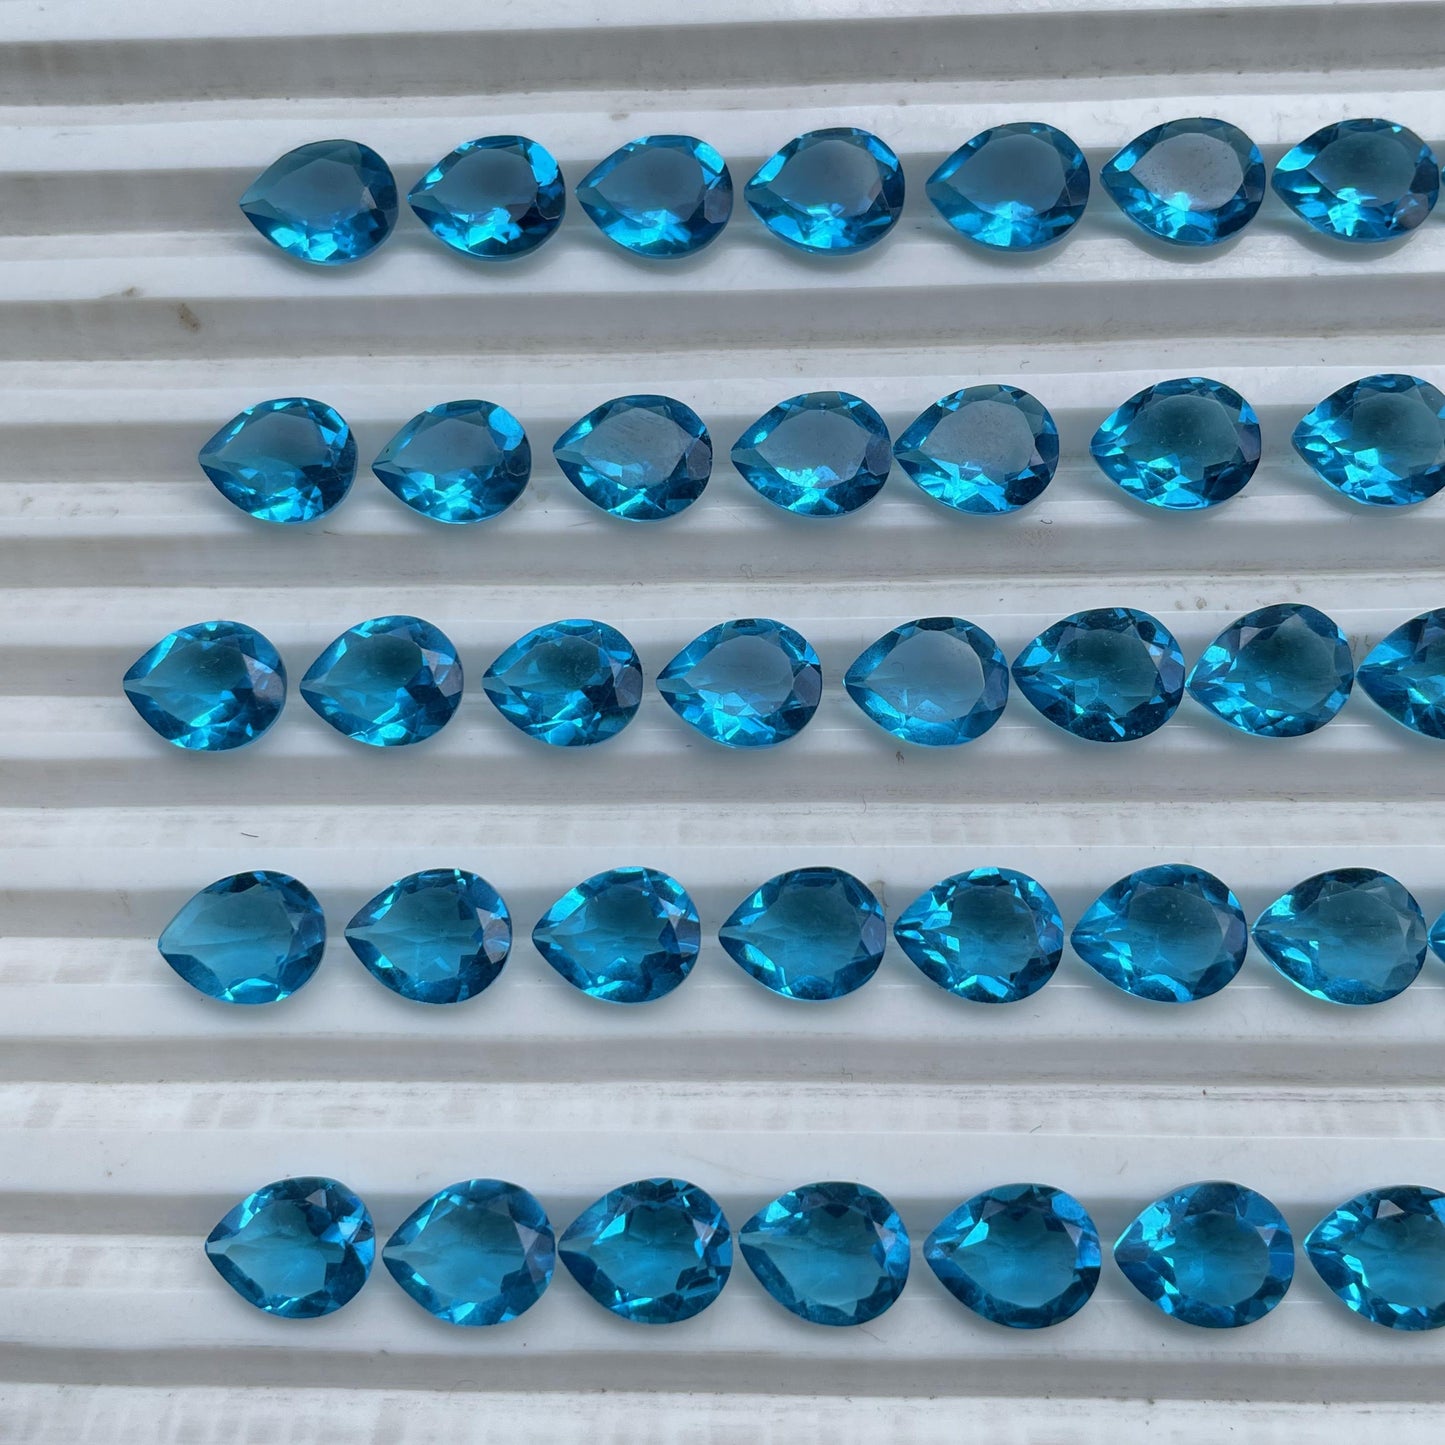 Swiss Blue Topaz Faceted Nice Quality (8x10 mm) Pear Shape